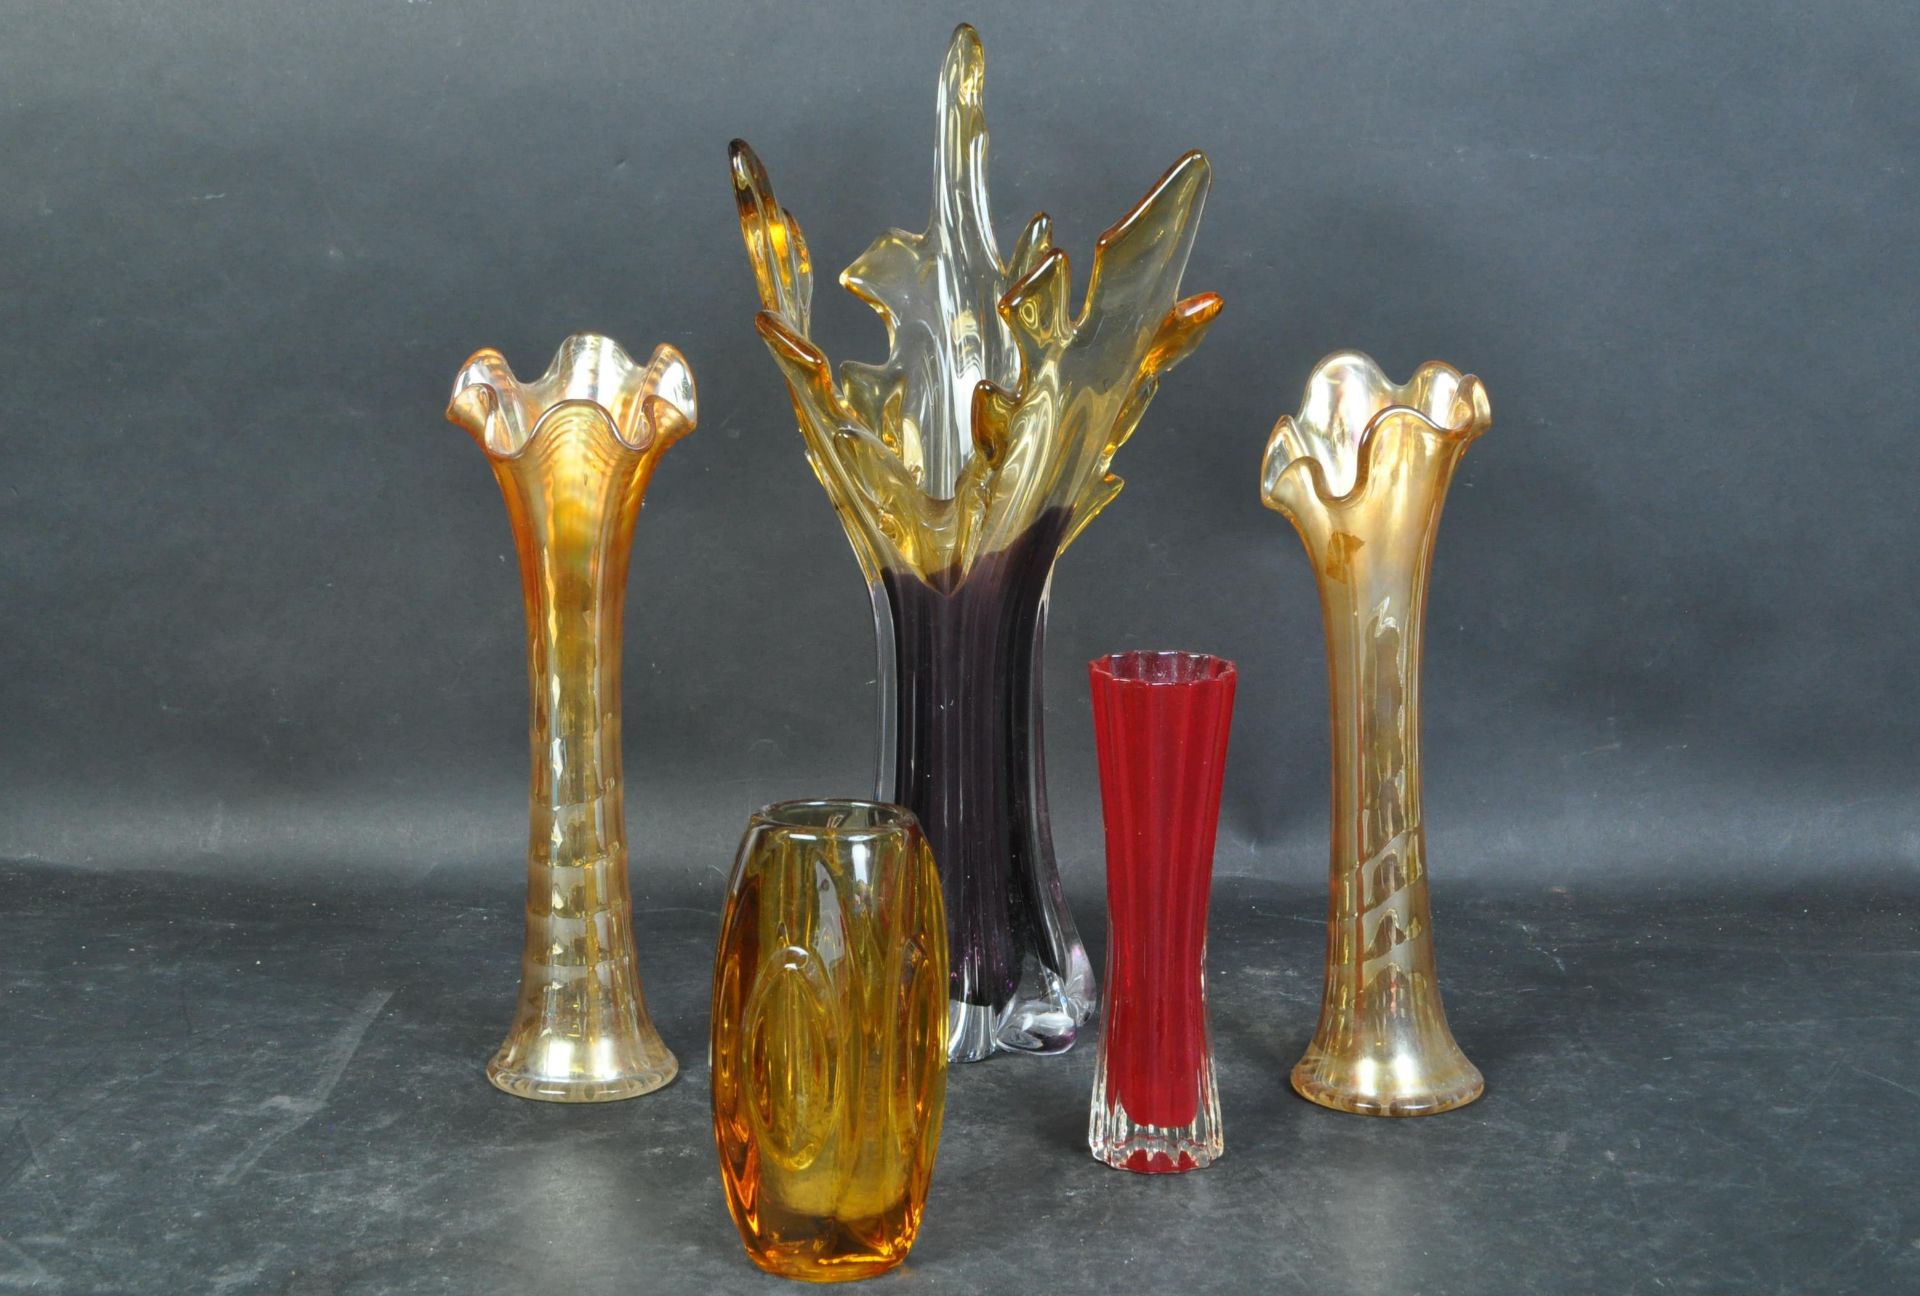 COLLECTON OF CARNIVAL FLAME GLASS